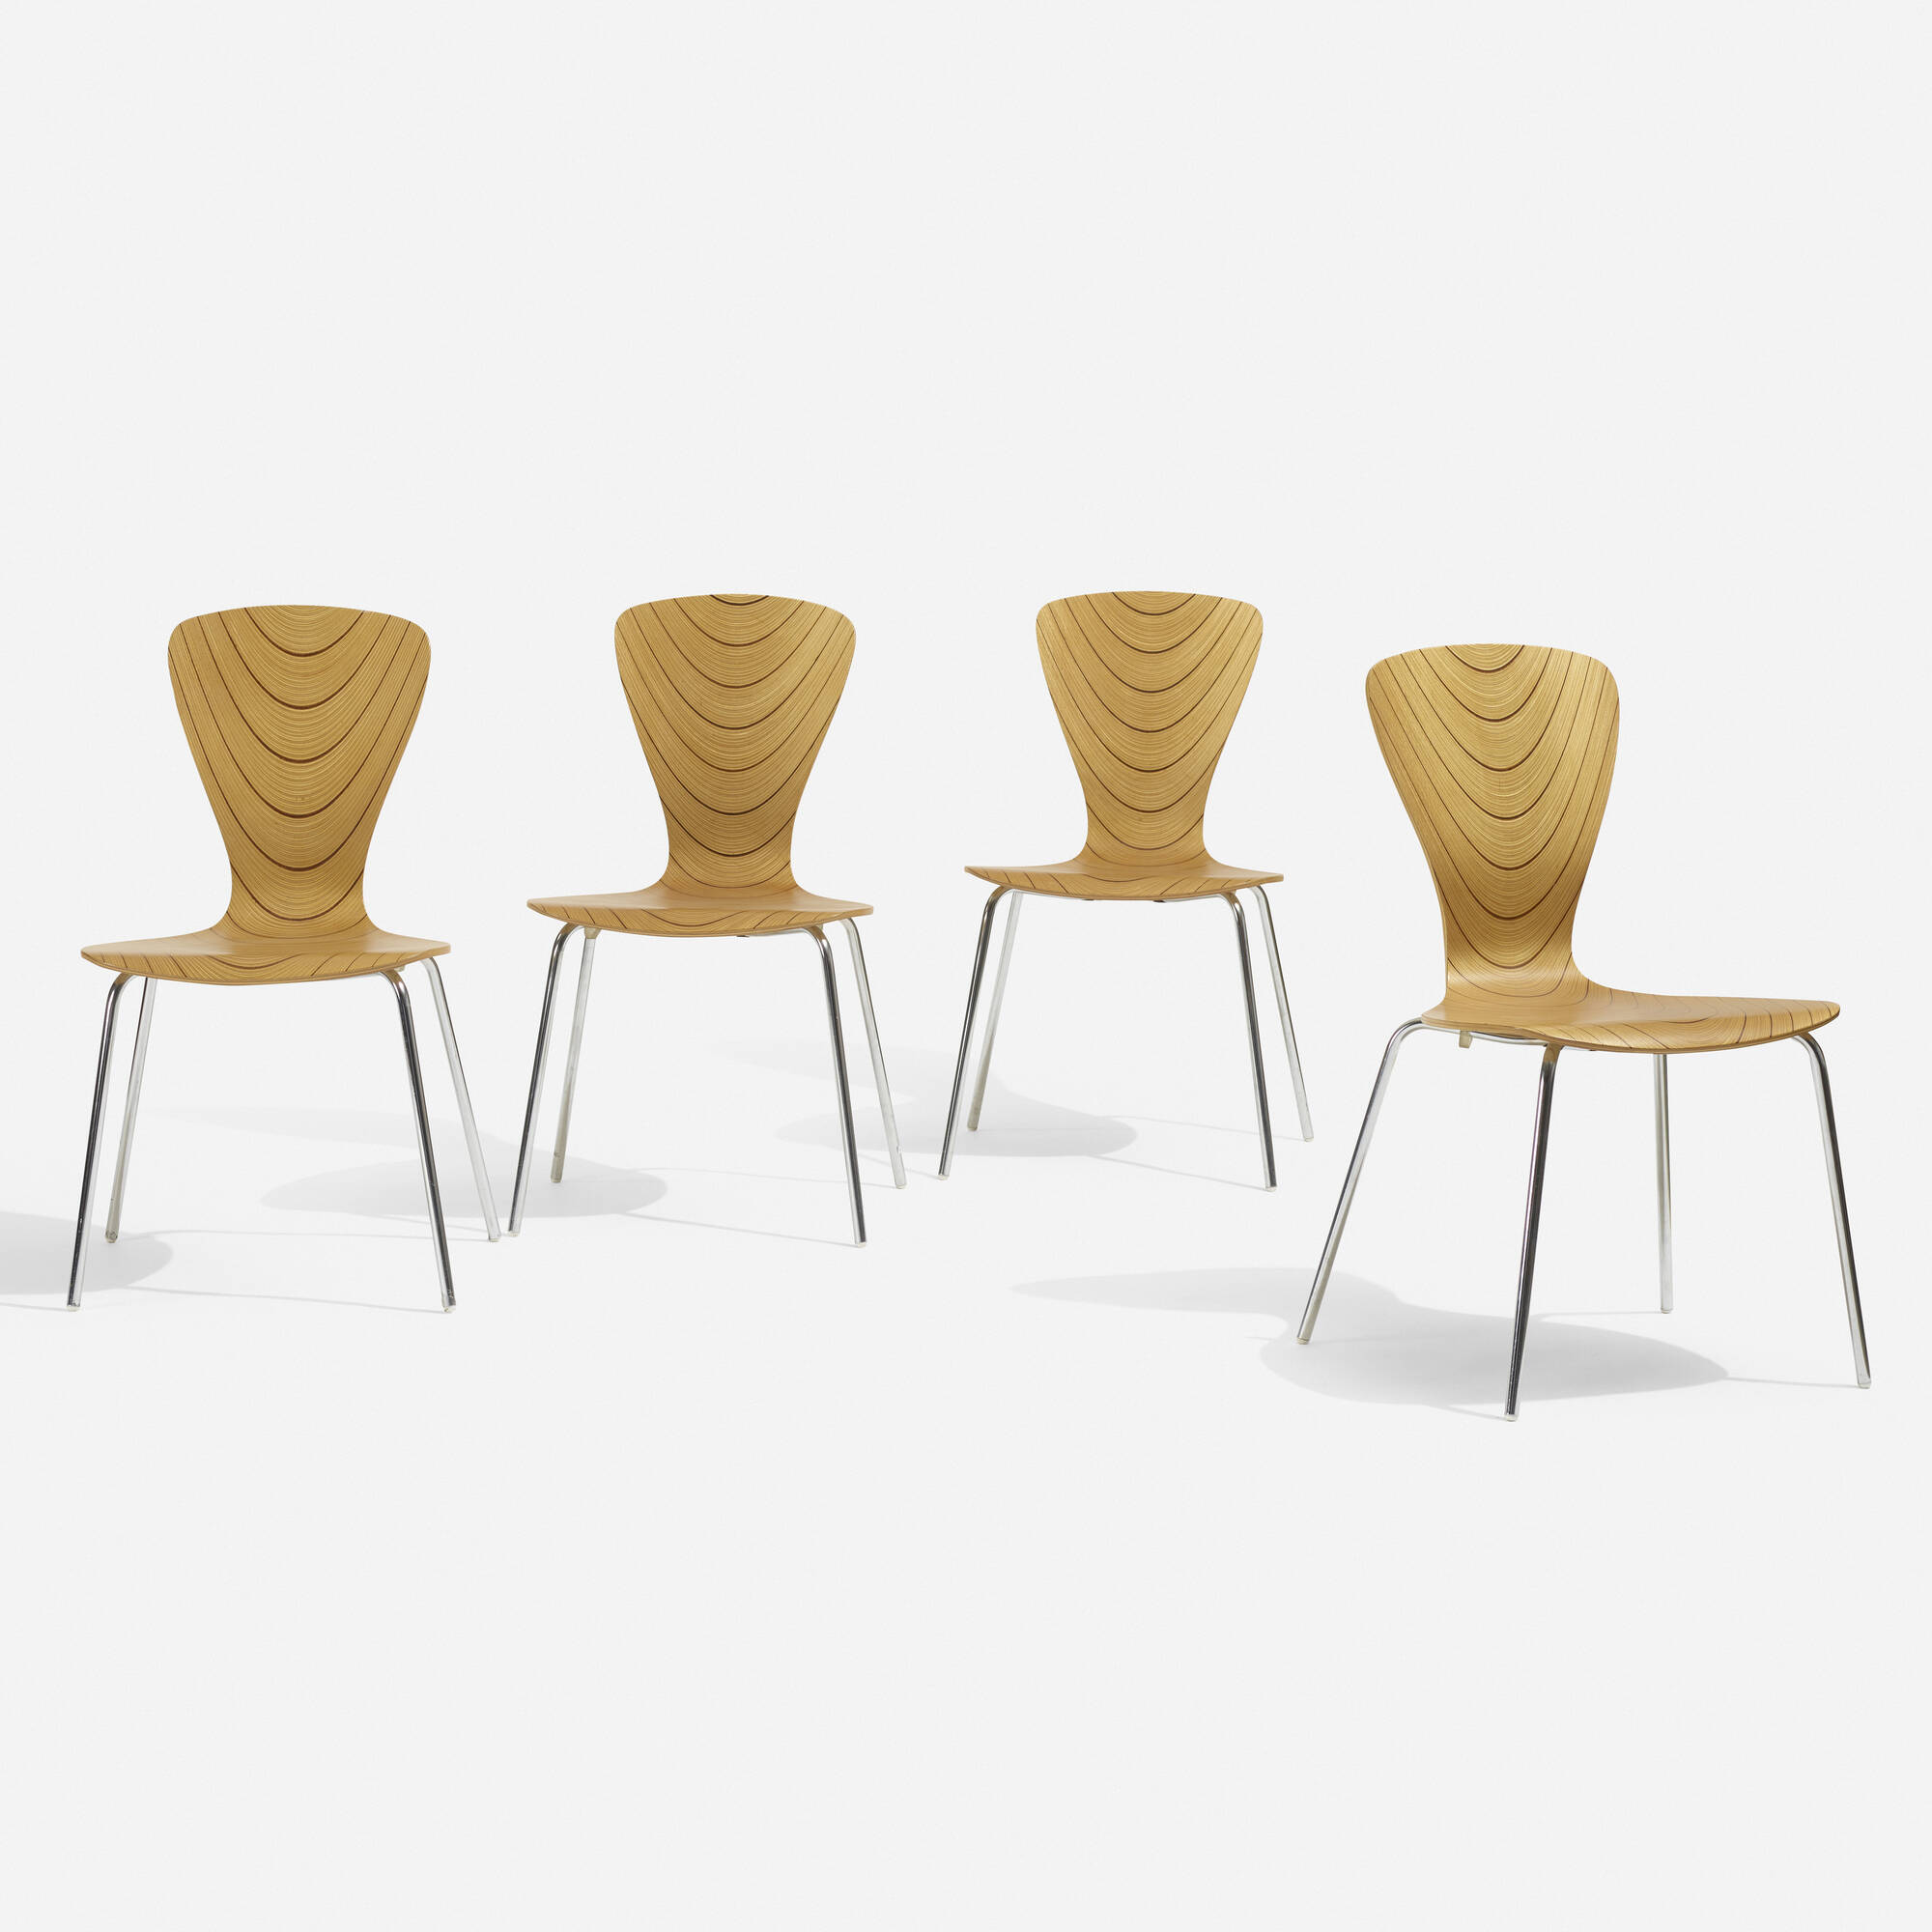 592: TAPIO WIRKKALA, Nikke chairs model 9019, set of four < Mass Modern:  Day 2, 12 August 2022 < Auctions | Wright: Auctions of Art and Design